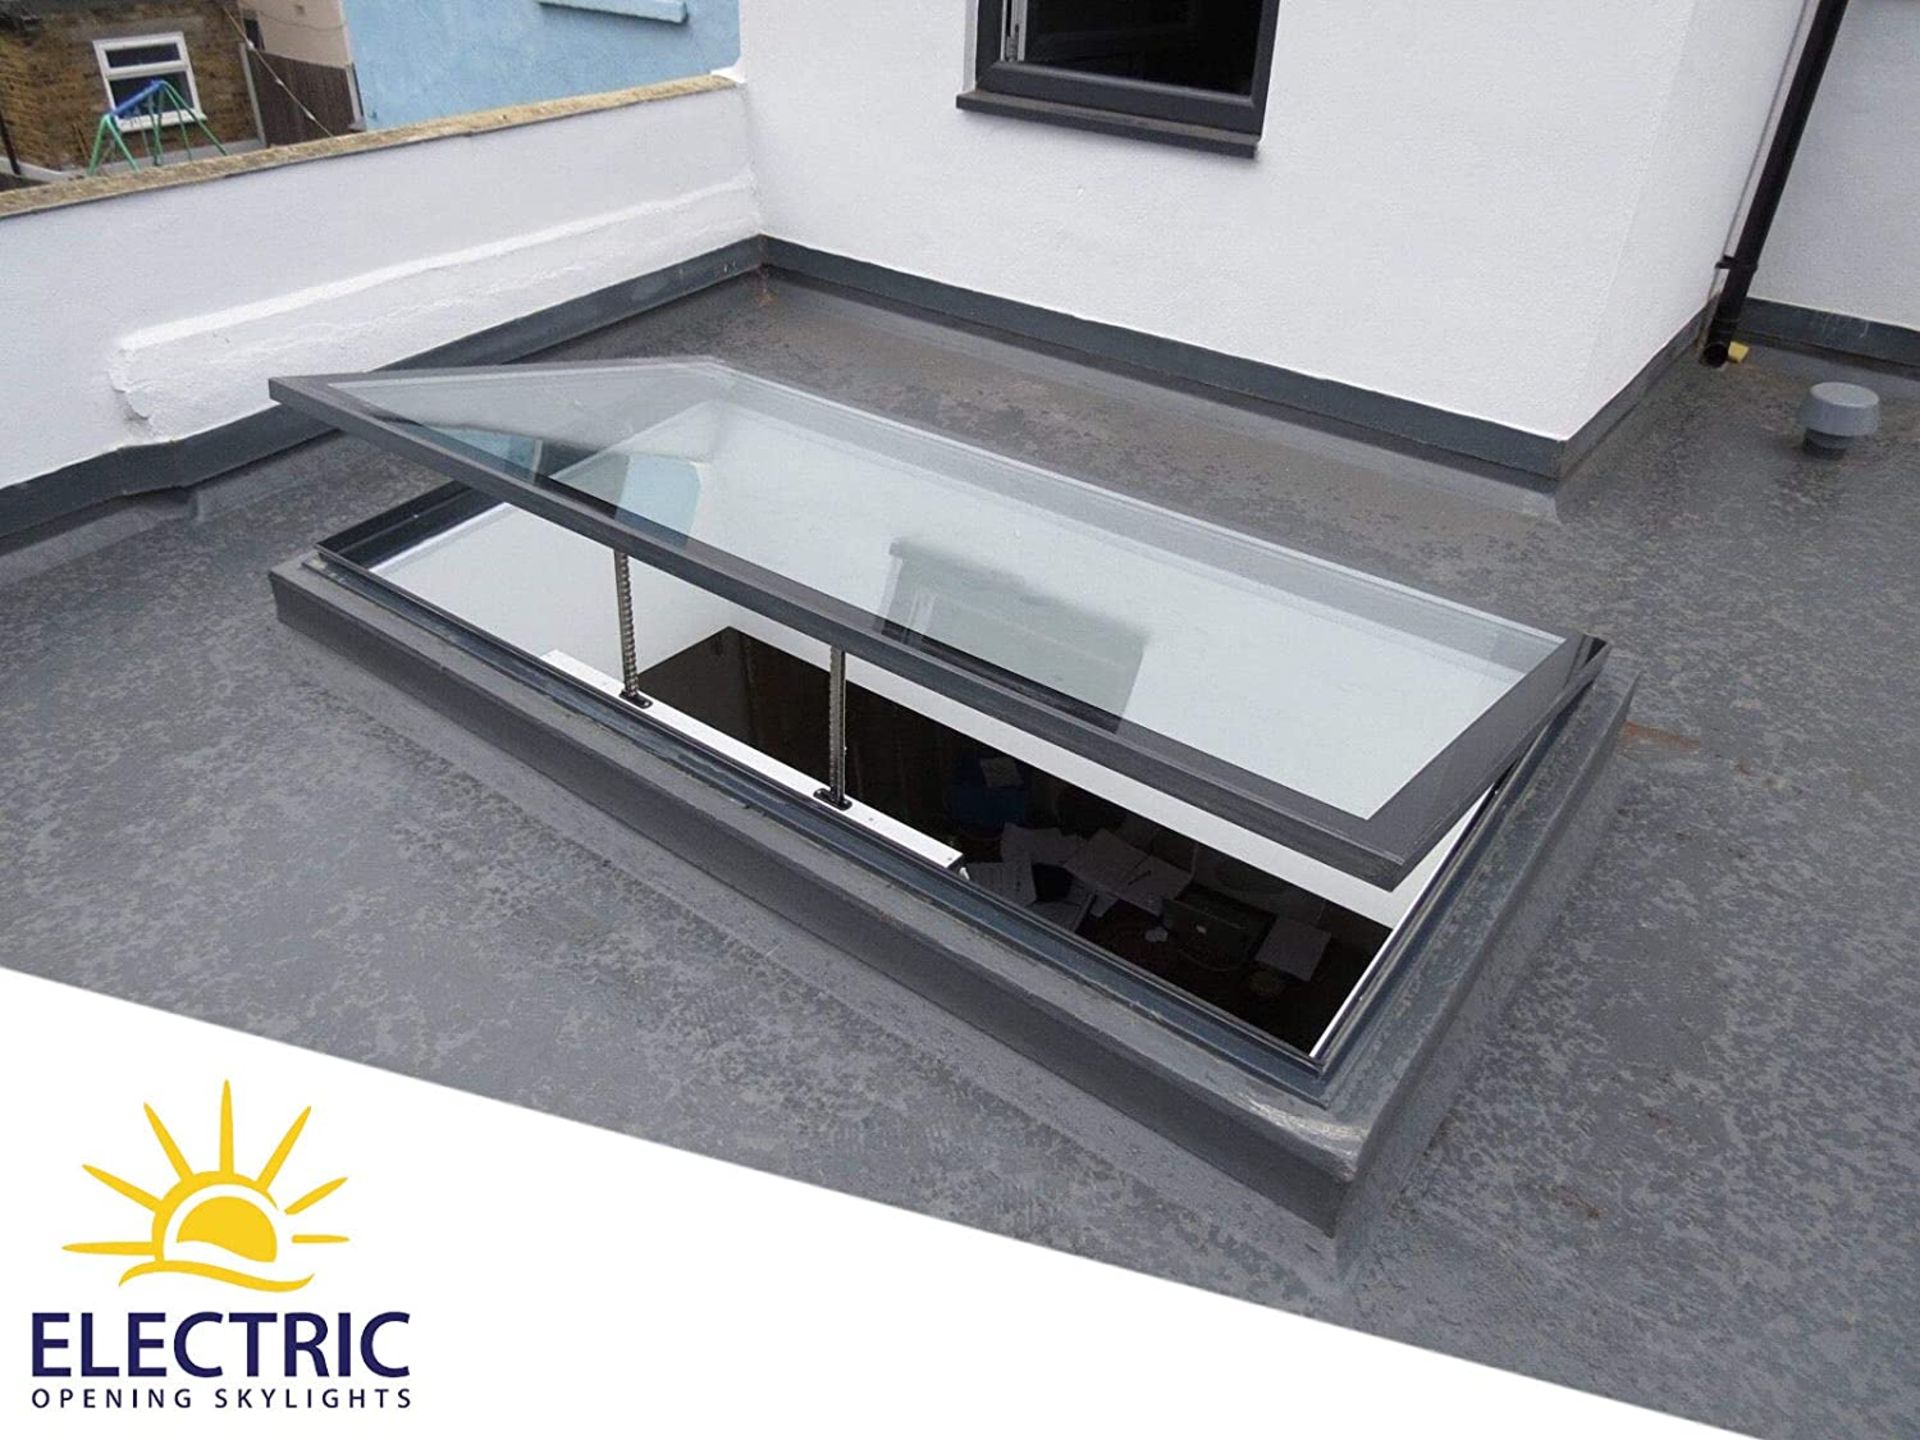 Panoroof (EOS) Electric Opening Skylight 800x1200mm - Aluminiun Frame Double Glazed Laminated Self-